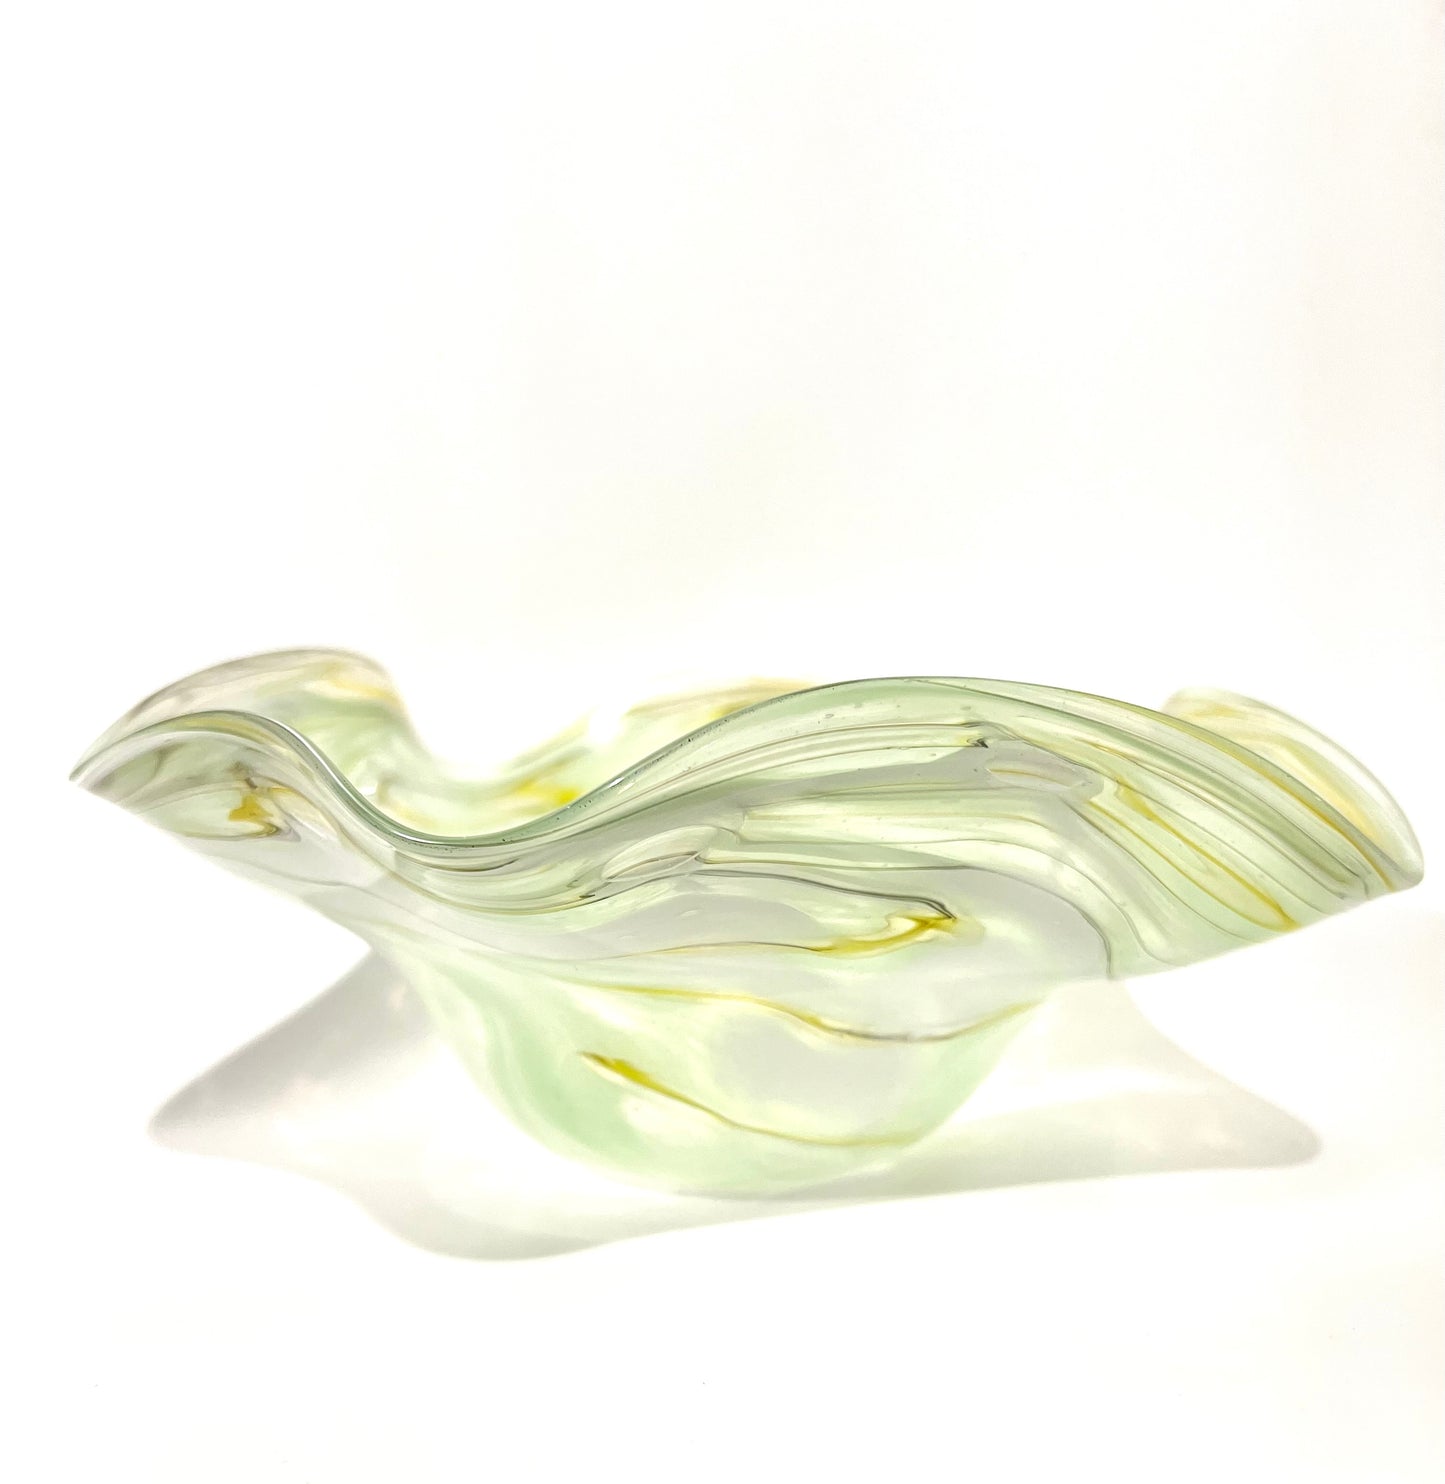 Light Teal Green and Yellow White Wavy Bowl